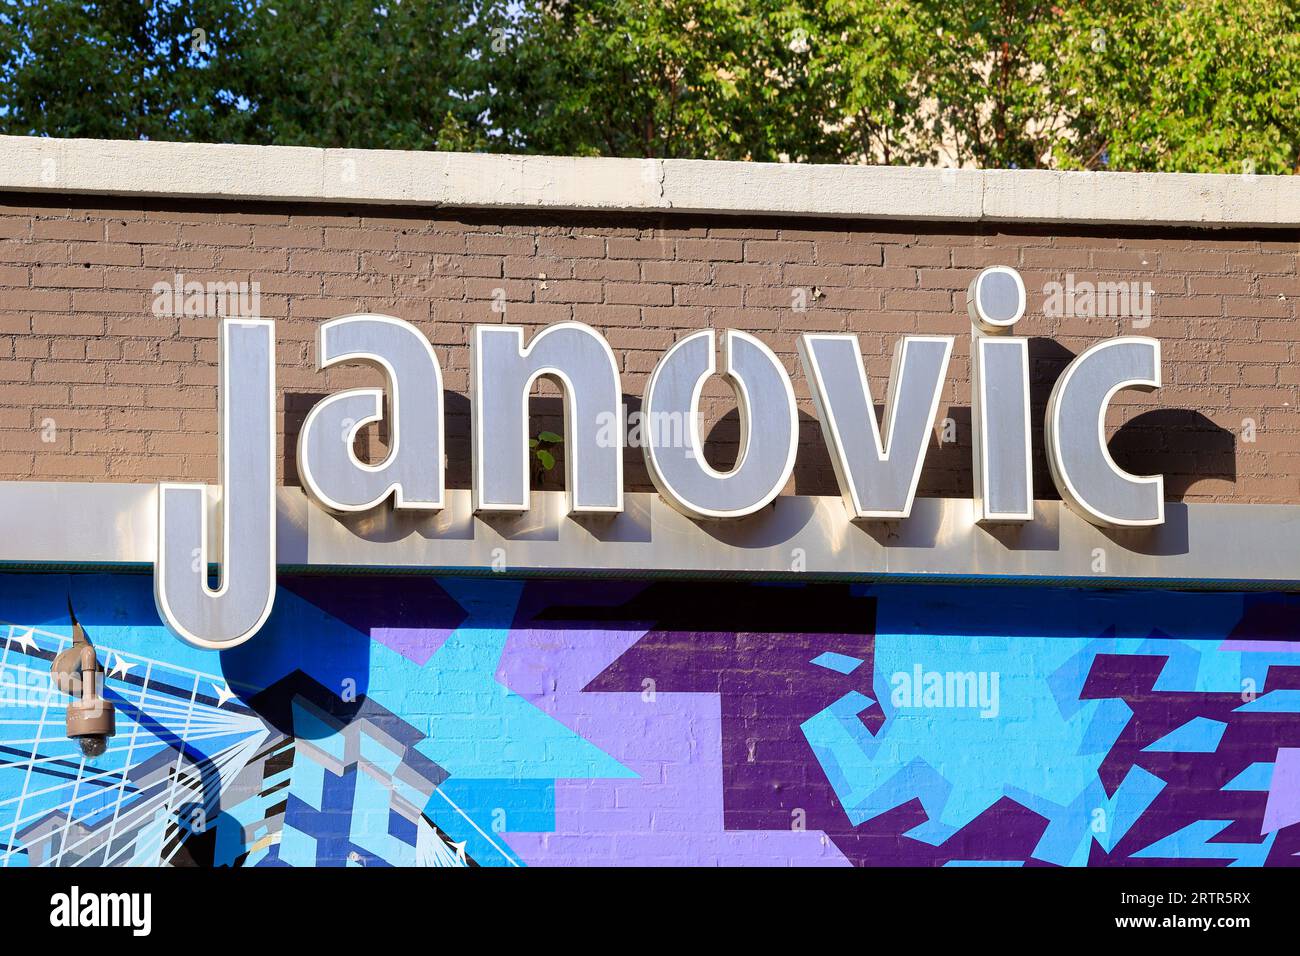 Signage for Janovic Paint & Decorating in New York City. Stock Photo